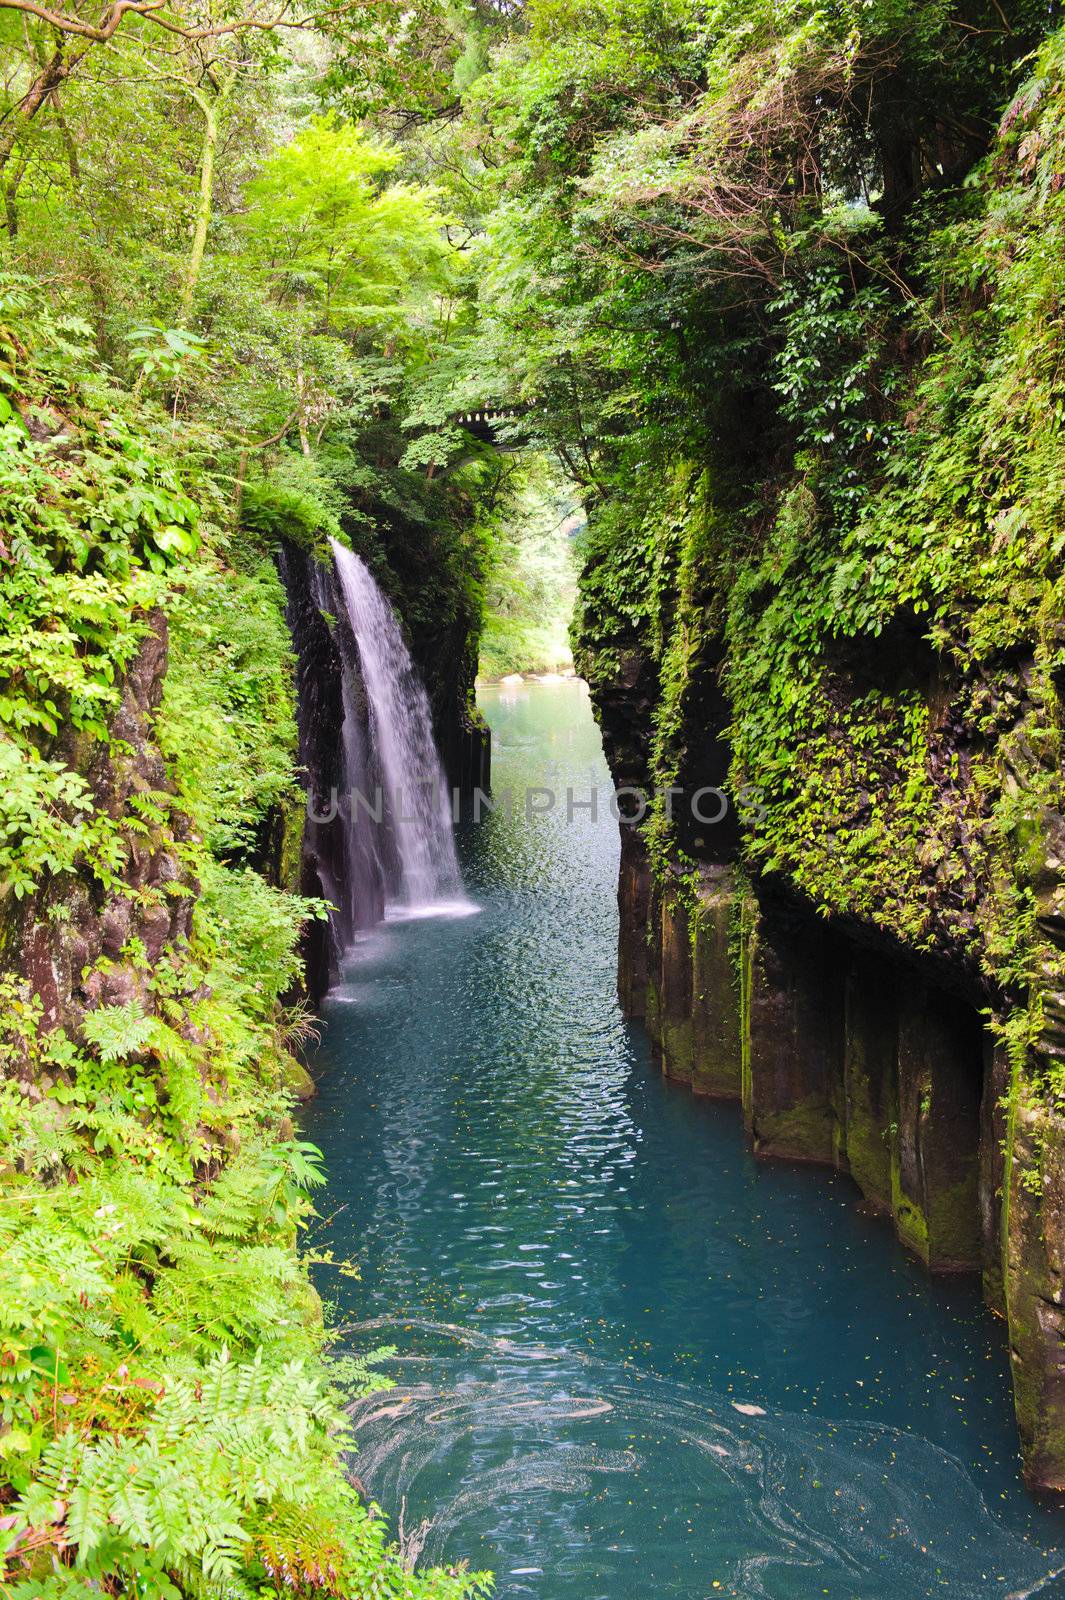 Takachiho gorge by fyletto